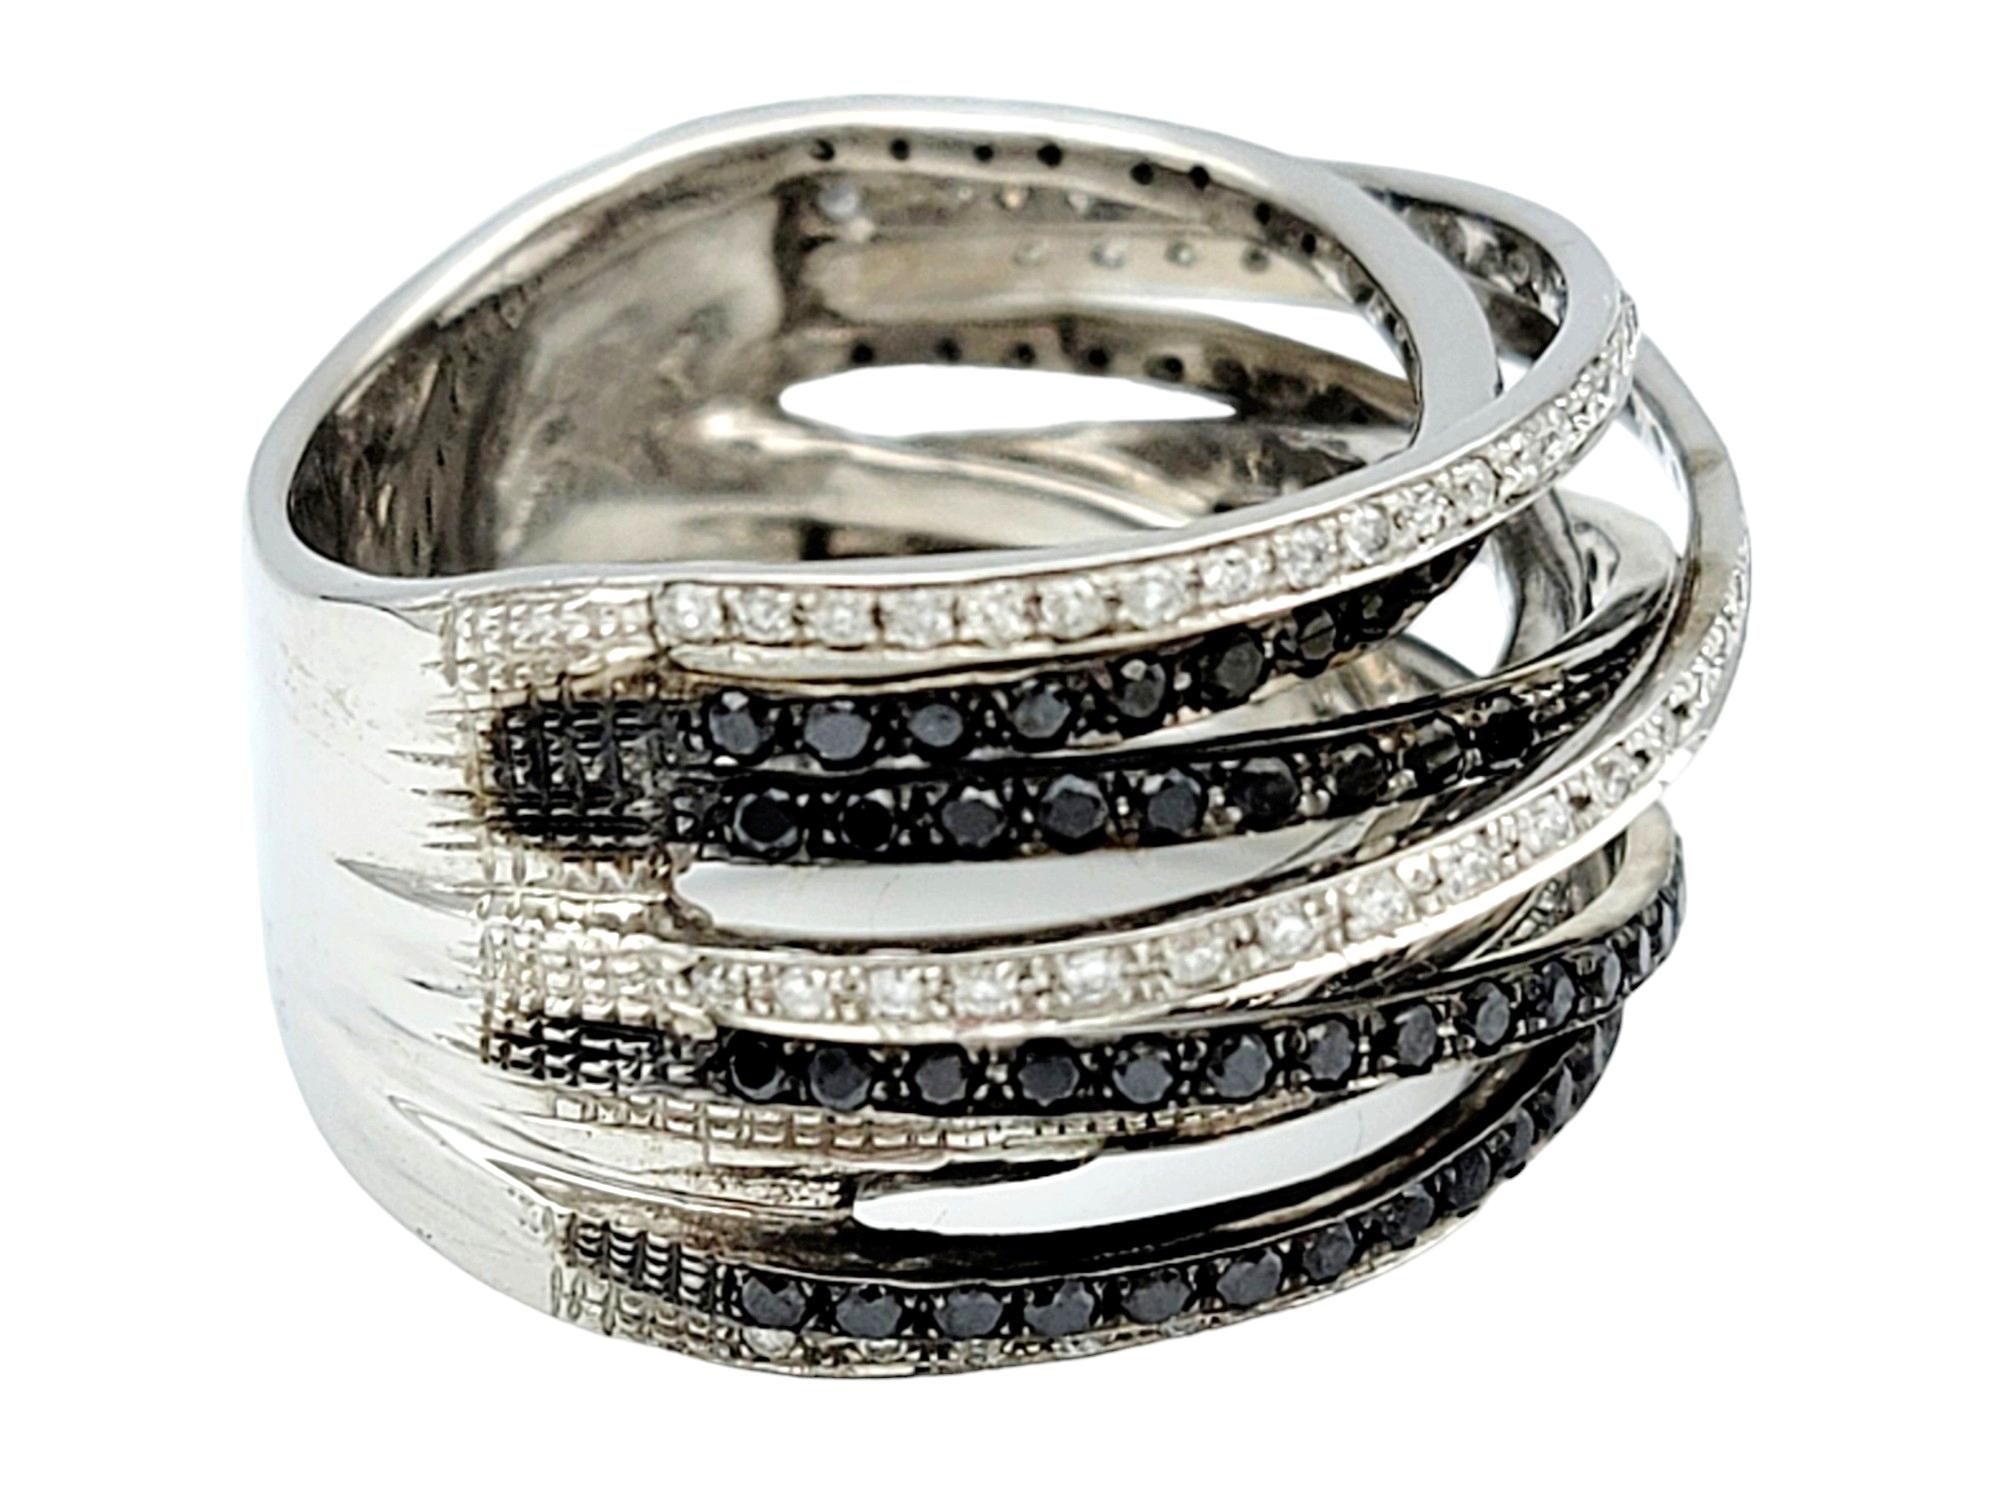 Black and White Diamond Multi-Row Layered Band Ring Set in 14 Karat White Gold In Good Condition For Sale In Scottsdale, AZ